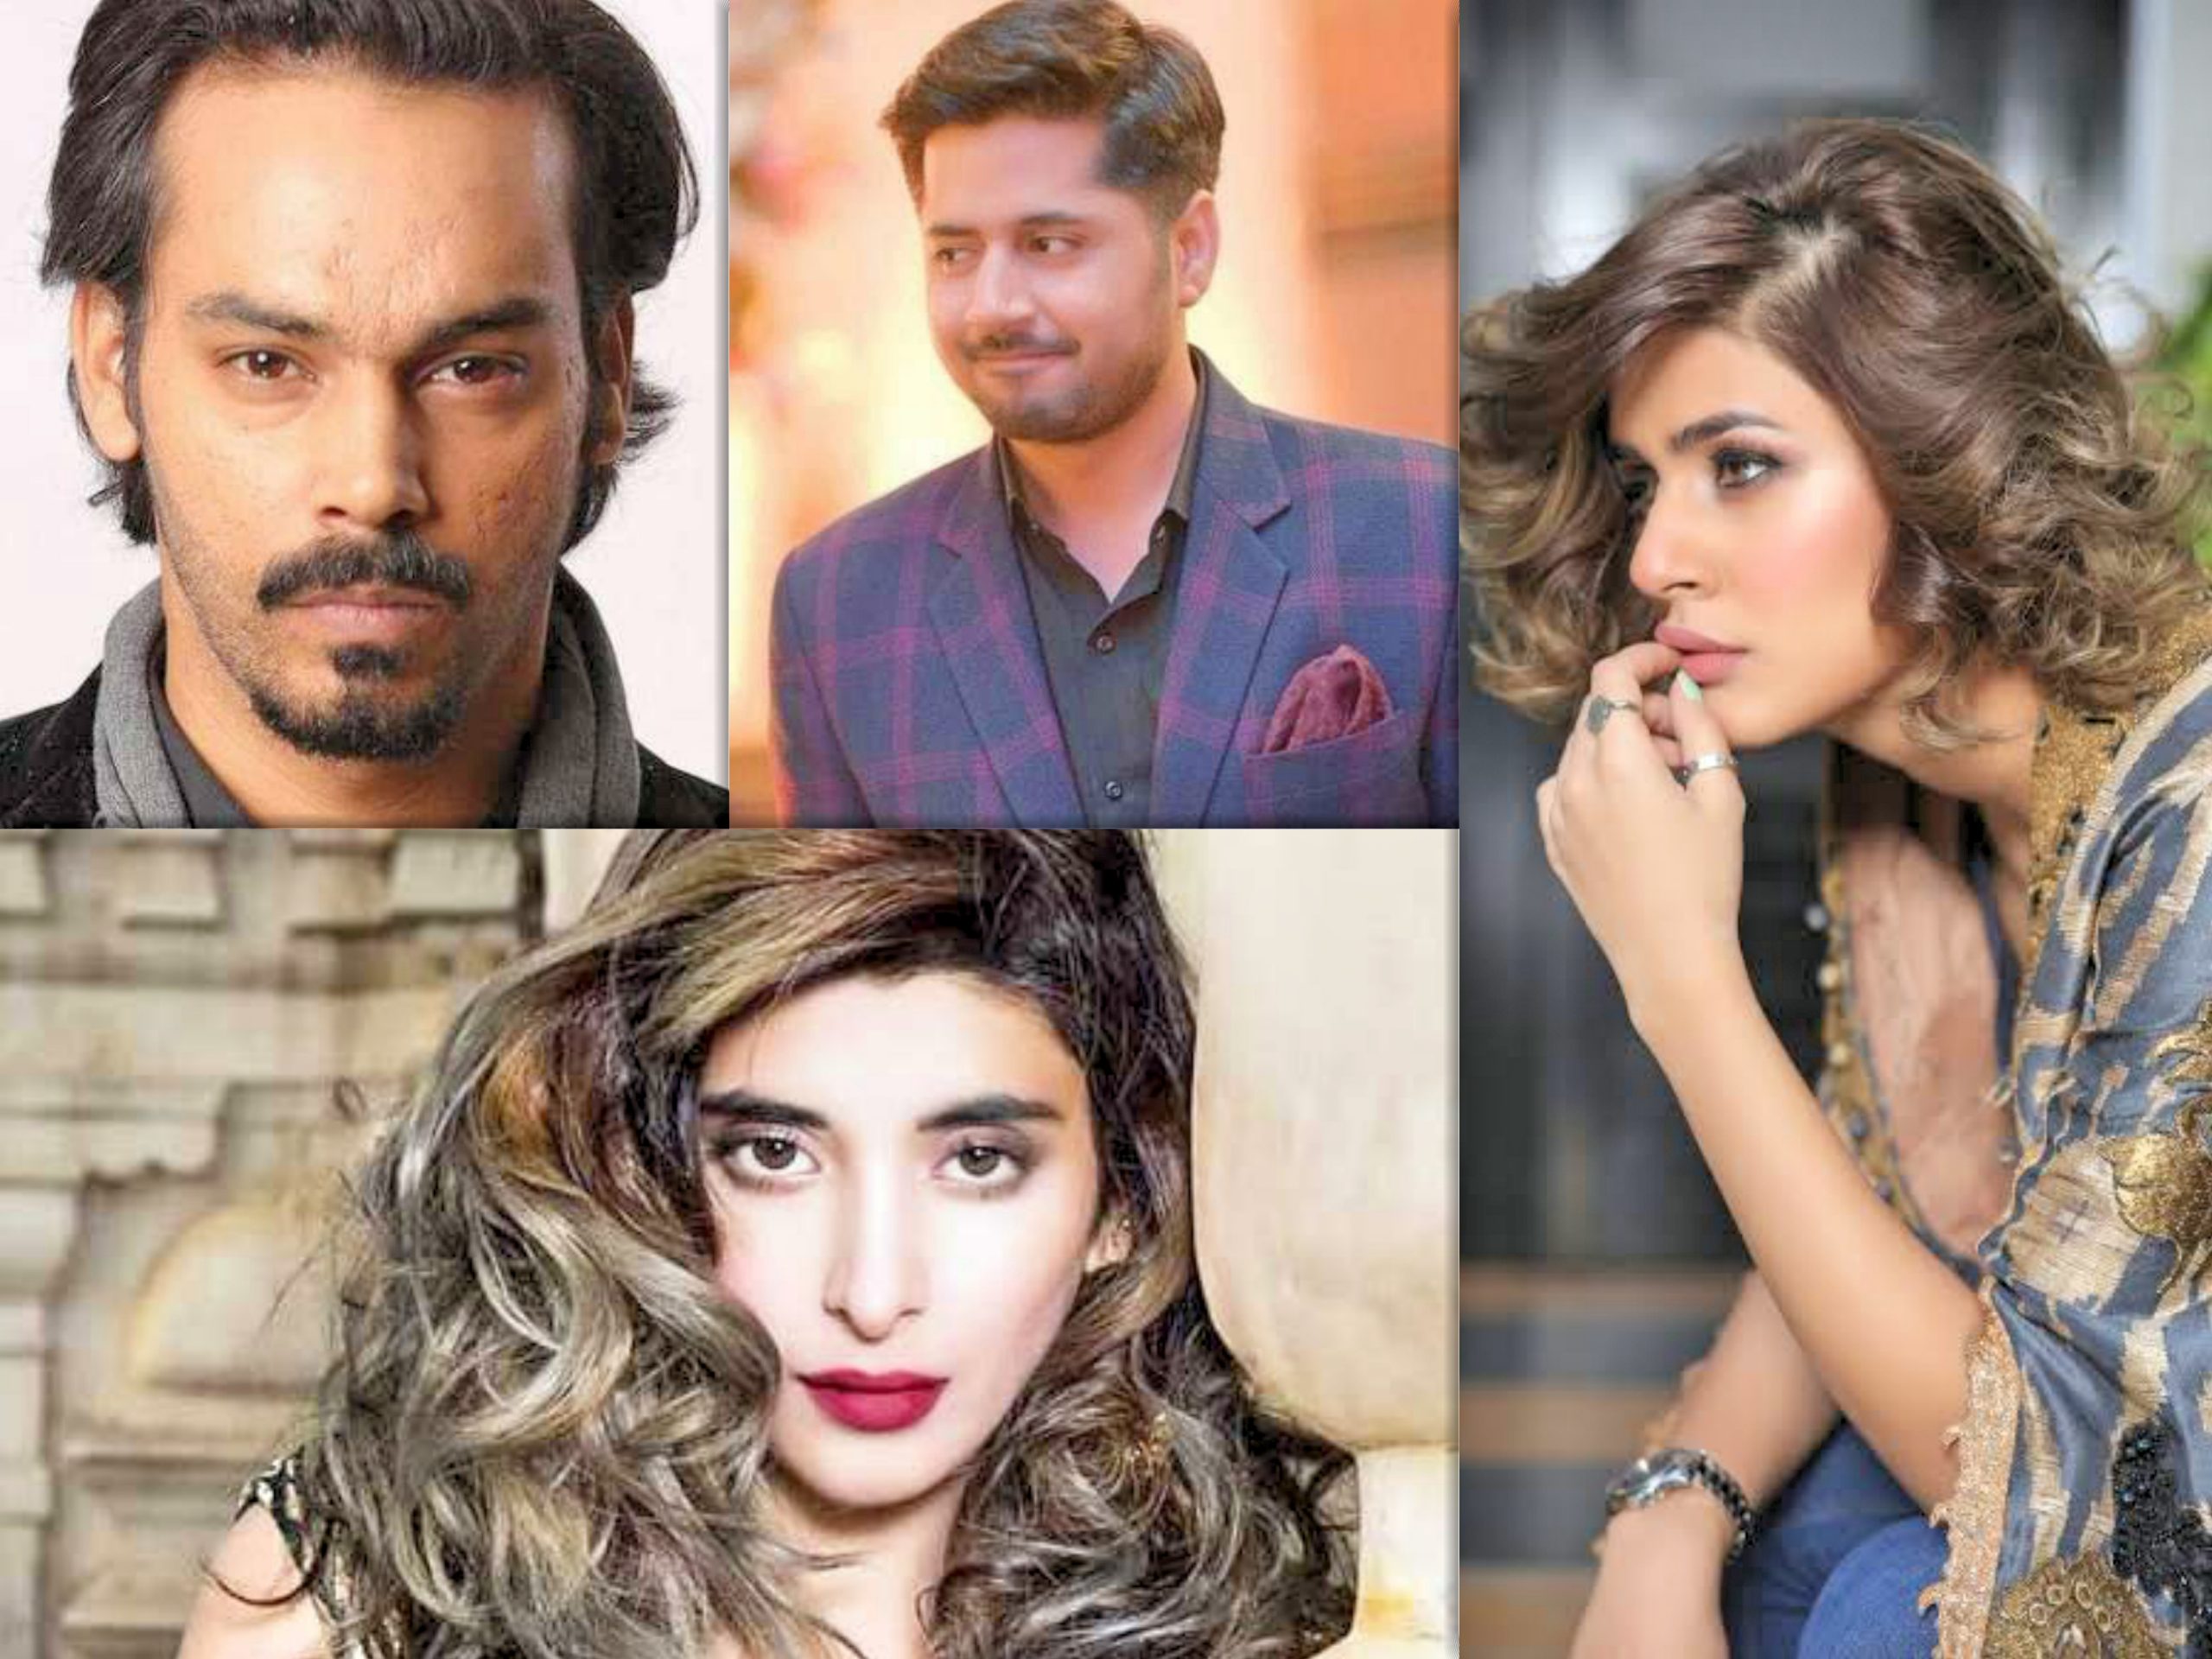 New Pakistani Dramas You Must Watch in 2020